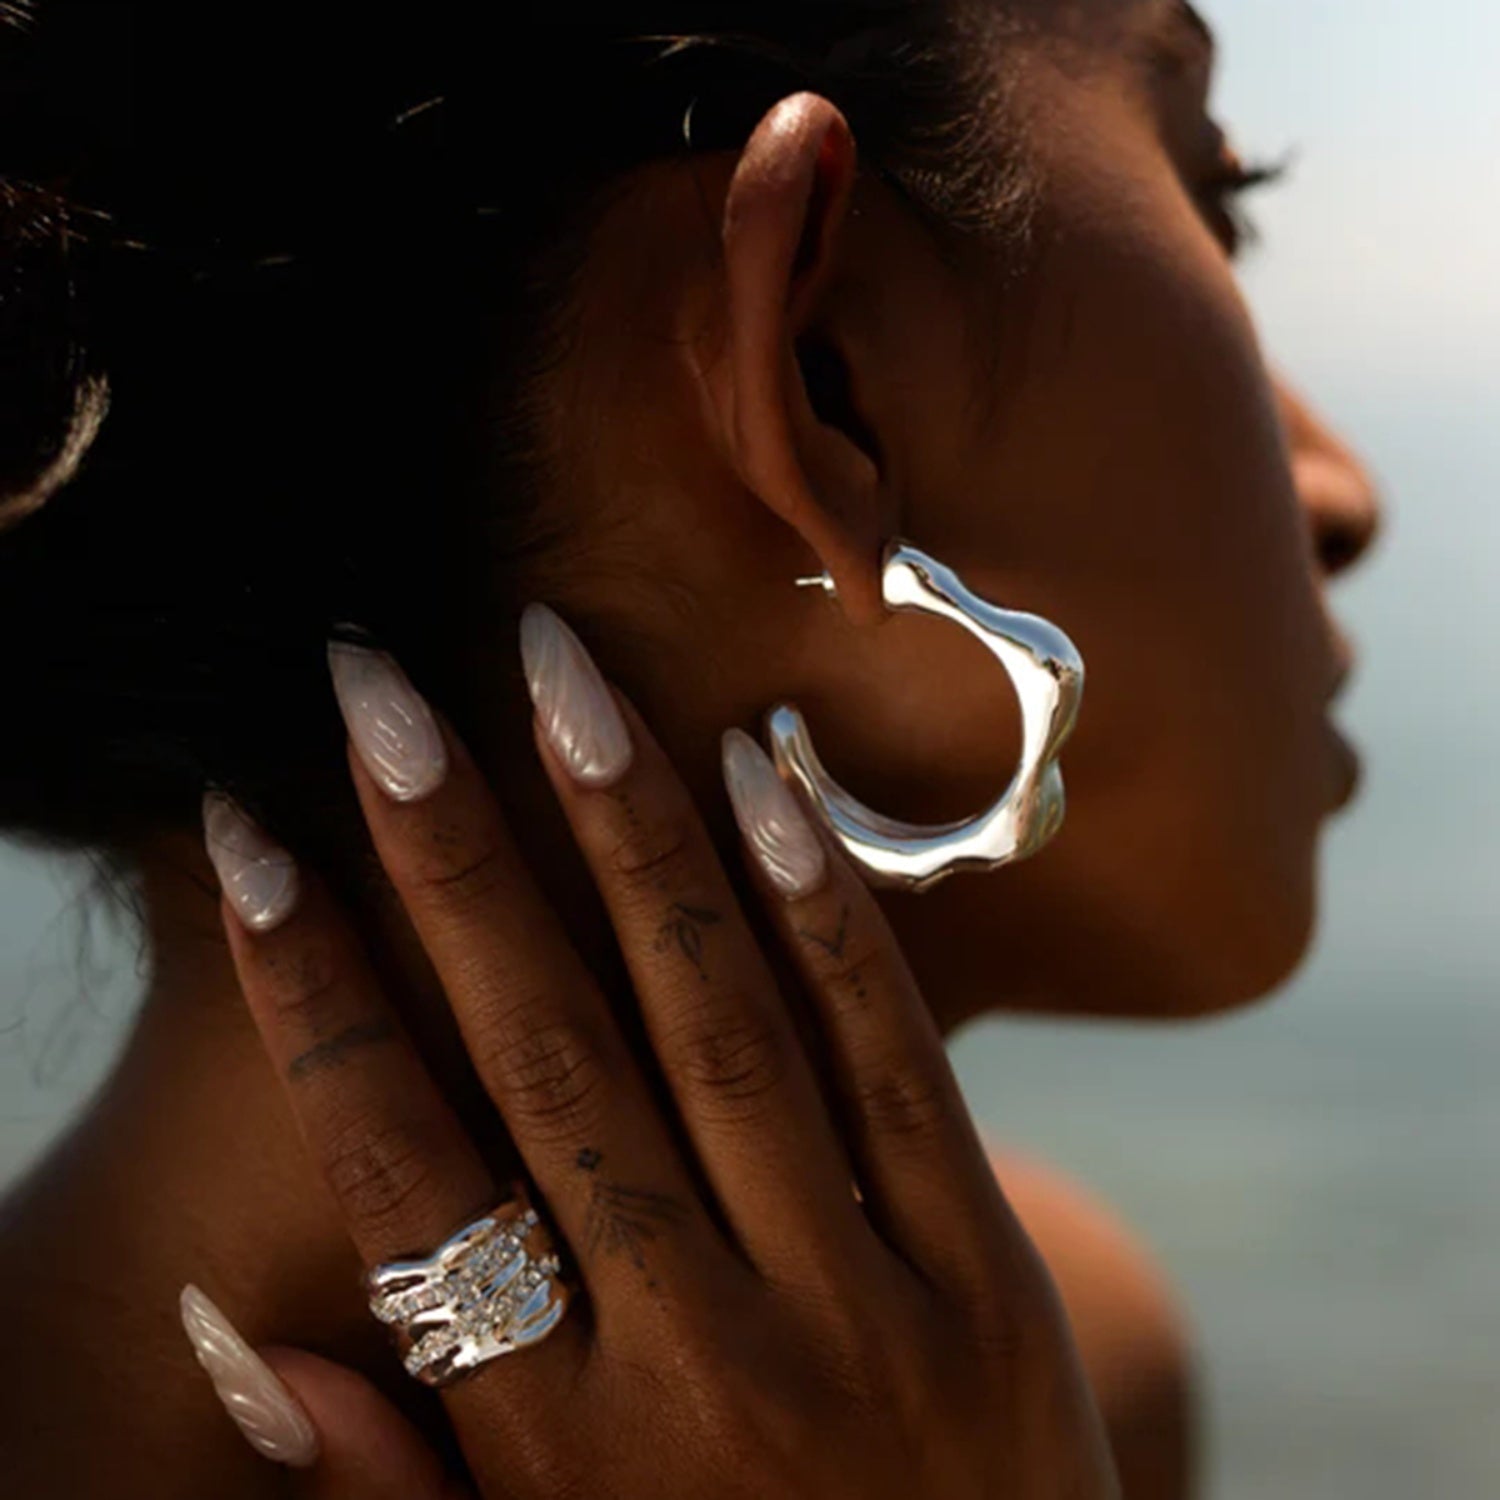 A close-up side profile of a person showcasing their sophisticated design Stainless Steel C-Hoop Earrings from Marianela's Exclusive Shop, LLC and a hand with long, manicured nails adorned with 18K gold-plated rings in focus. The background is blurred, highlighting the accessories and polished nails.